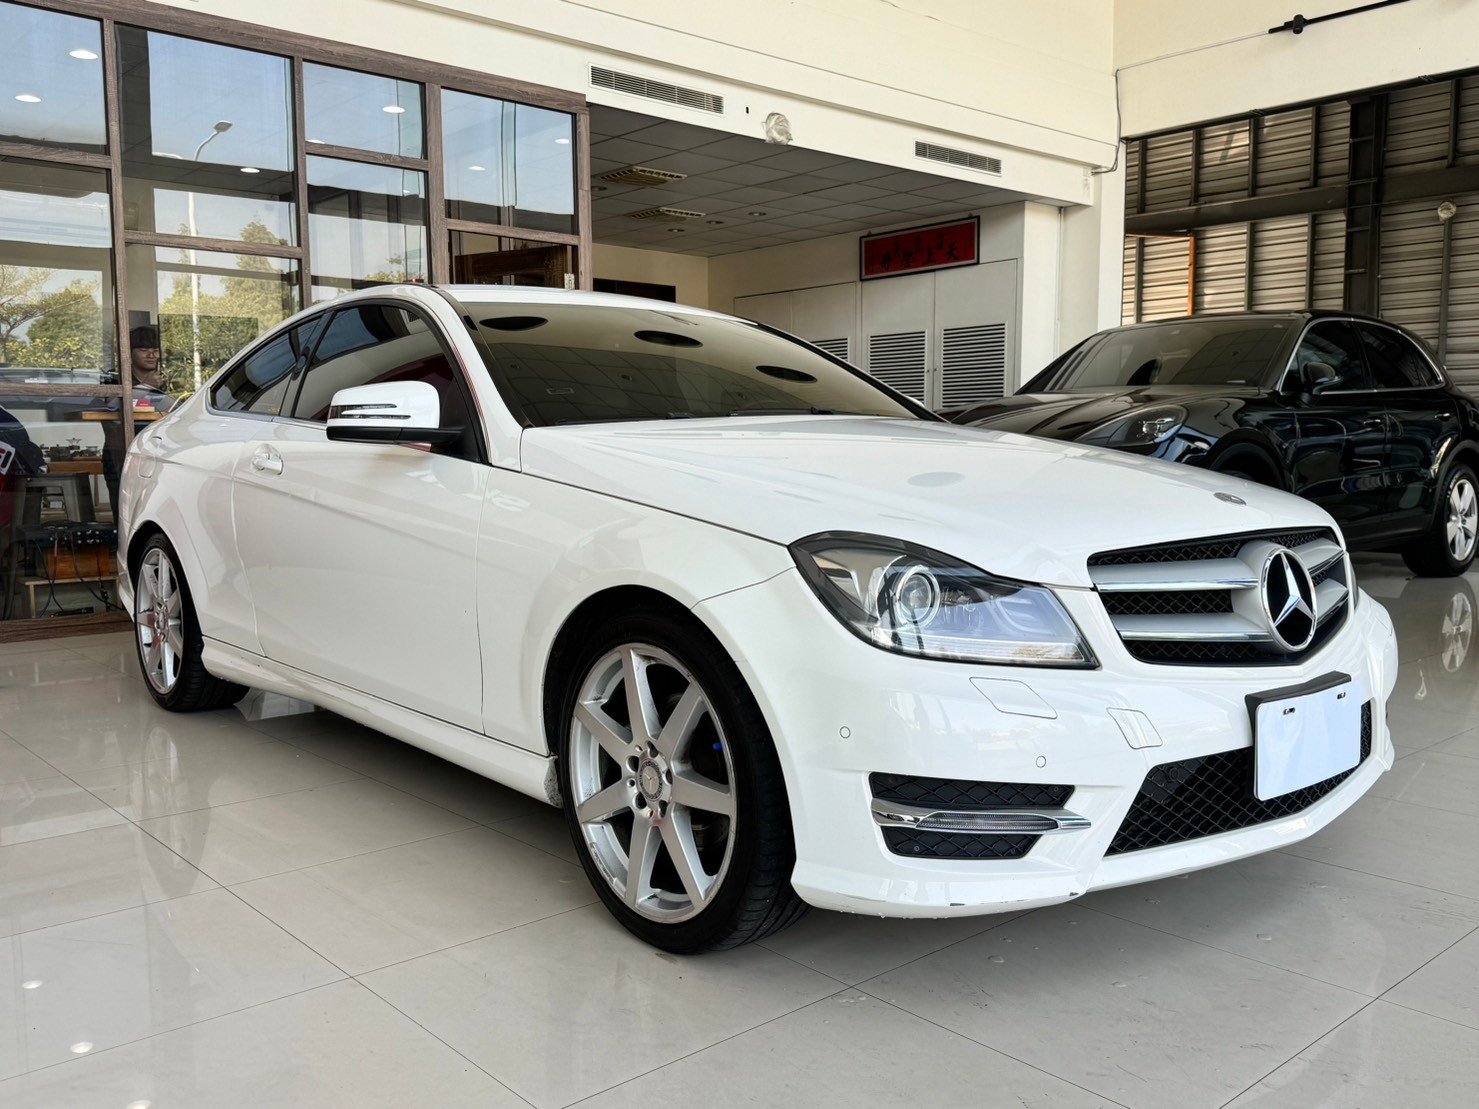 2014 M-Benz 賓士 C-class coupe